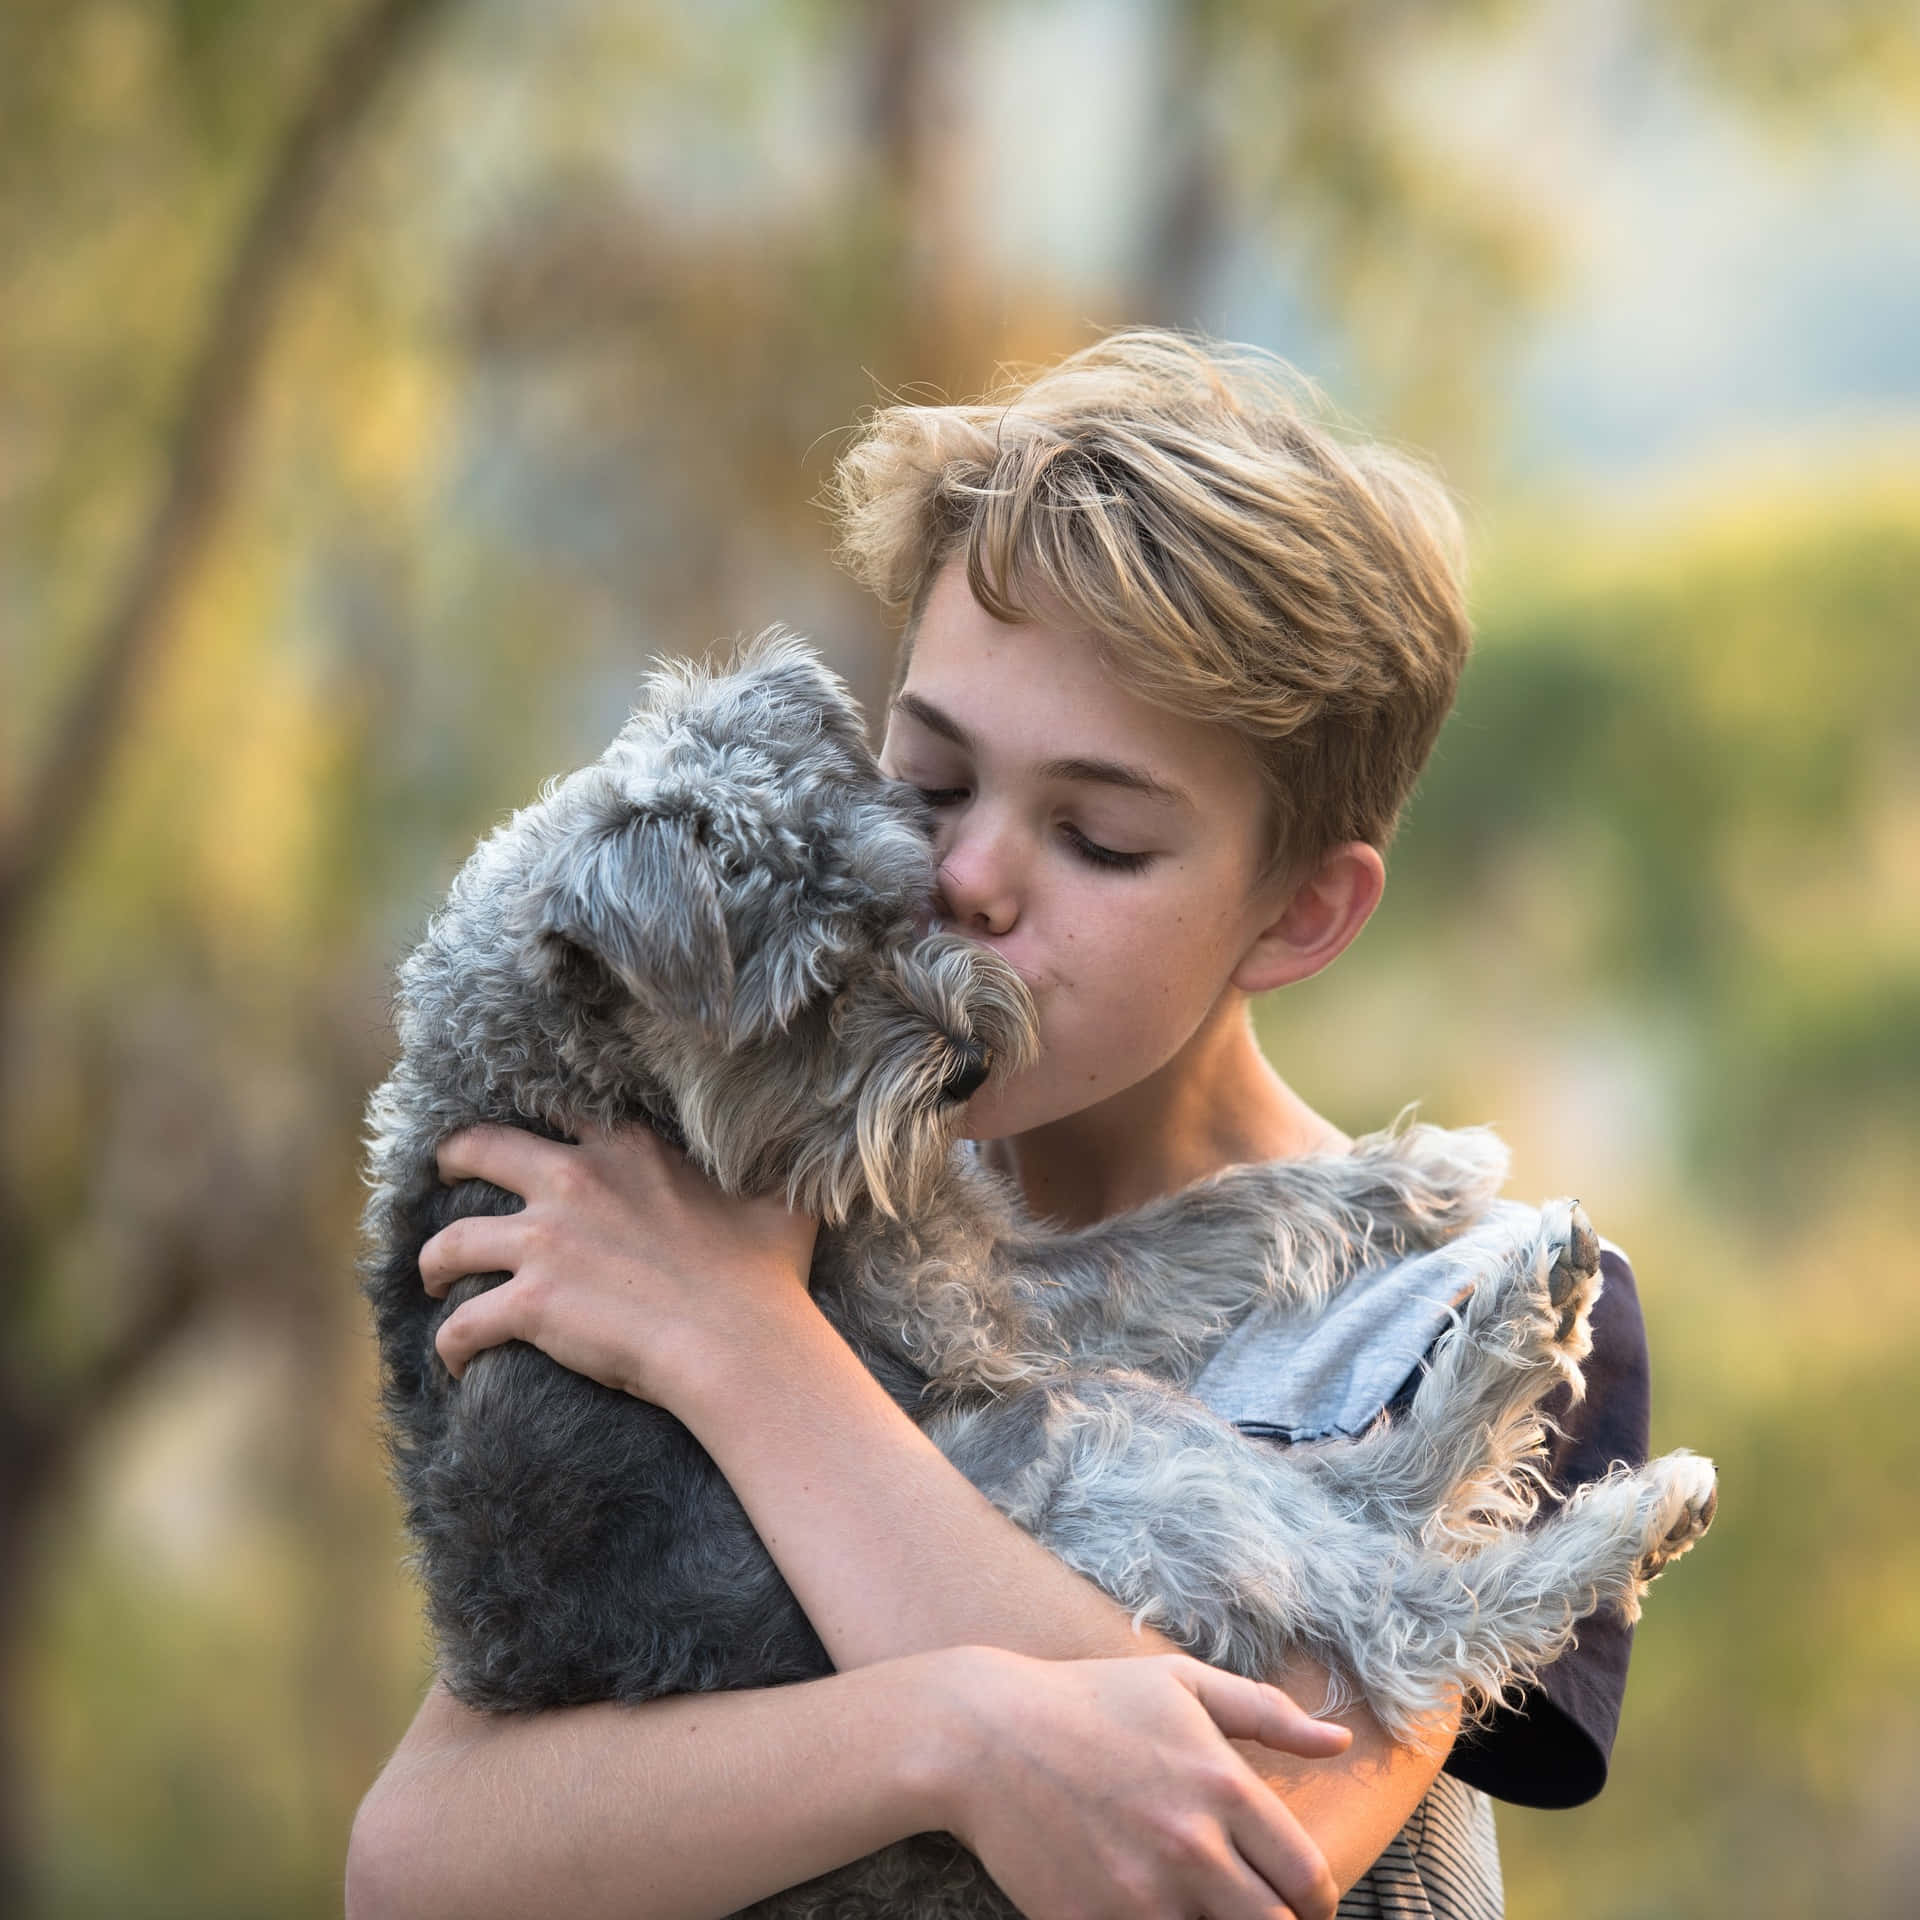 Adorable Photo Of A Young Boy Embracing And Kissing His Tangible Dog Wallpaper